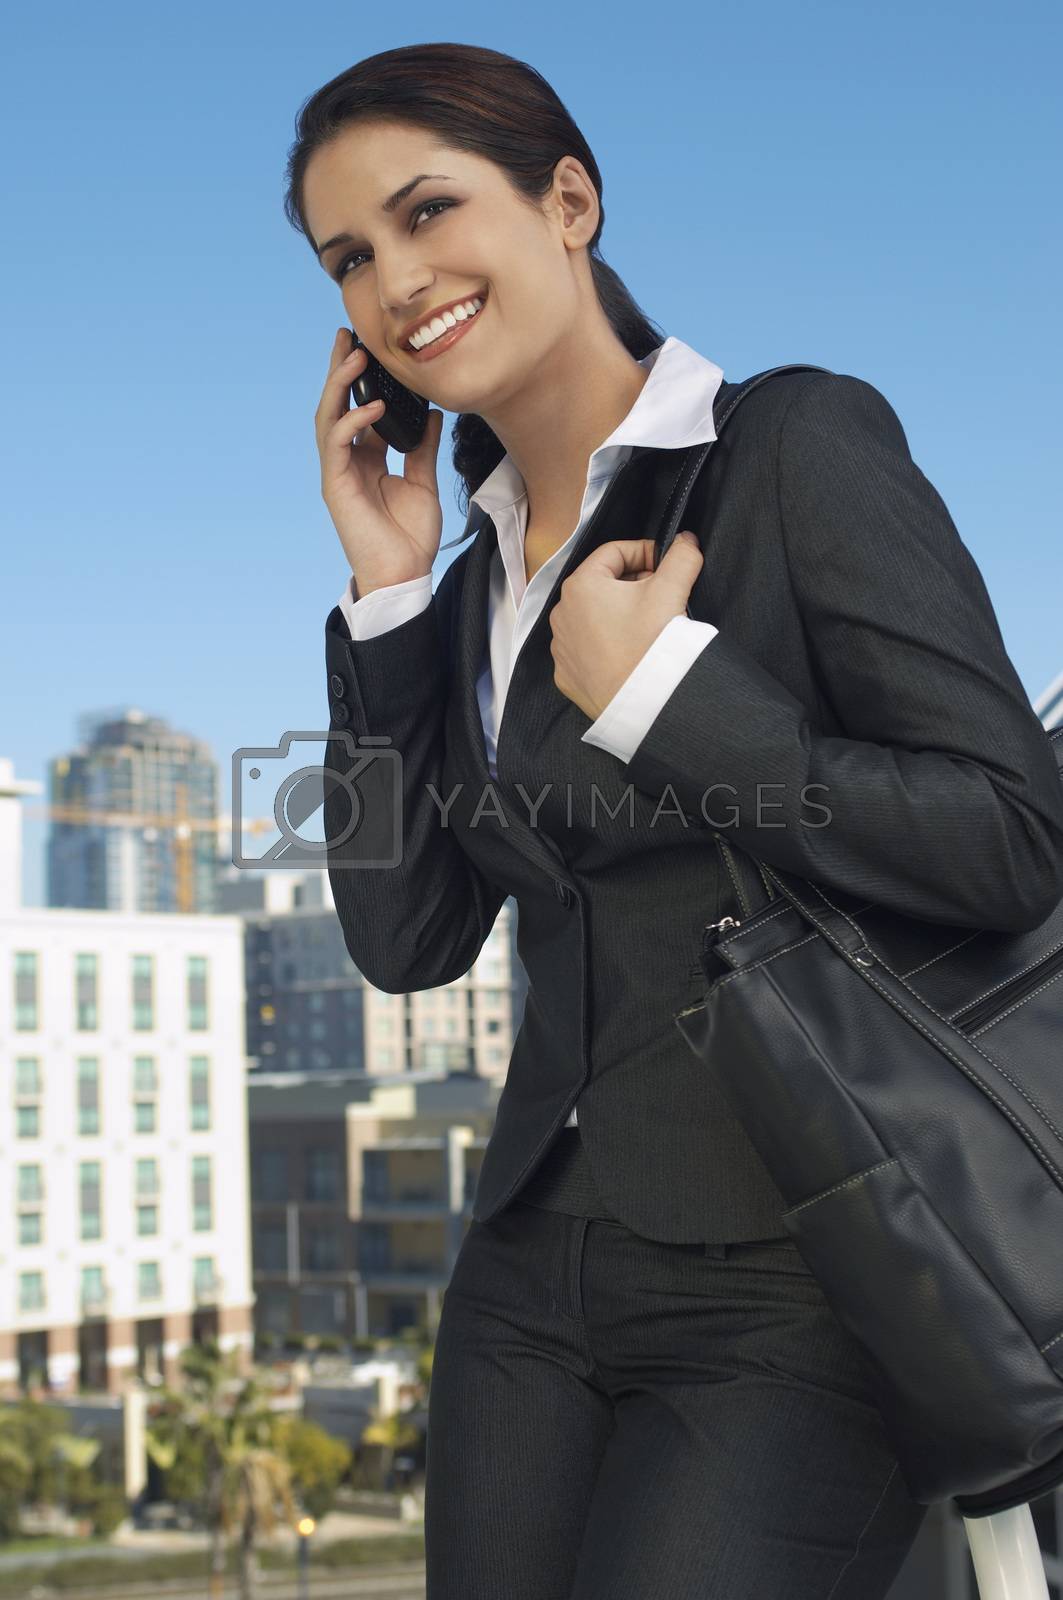 Royalty free image of Beautiful businesswoman using cell phone outdoors by moodboard